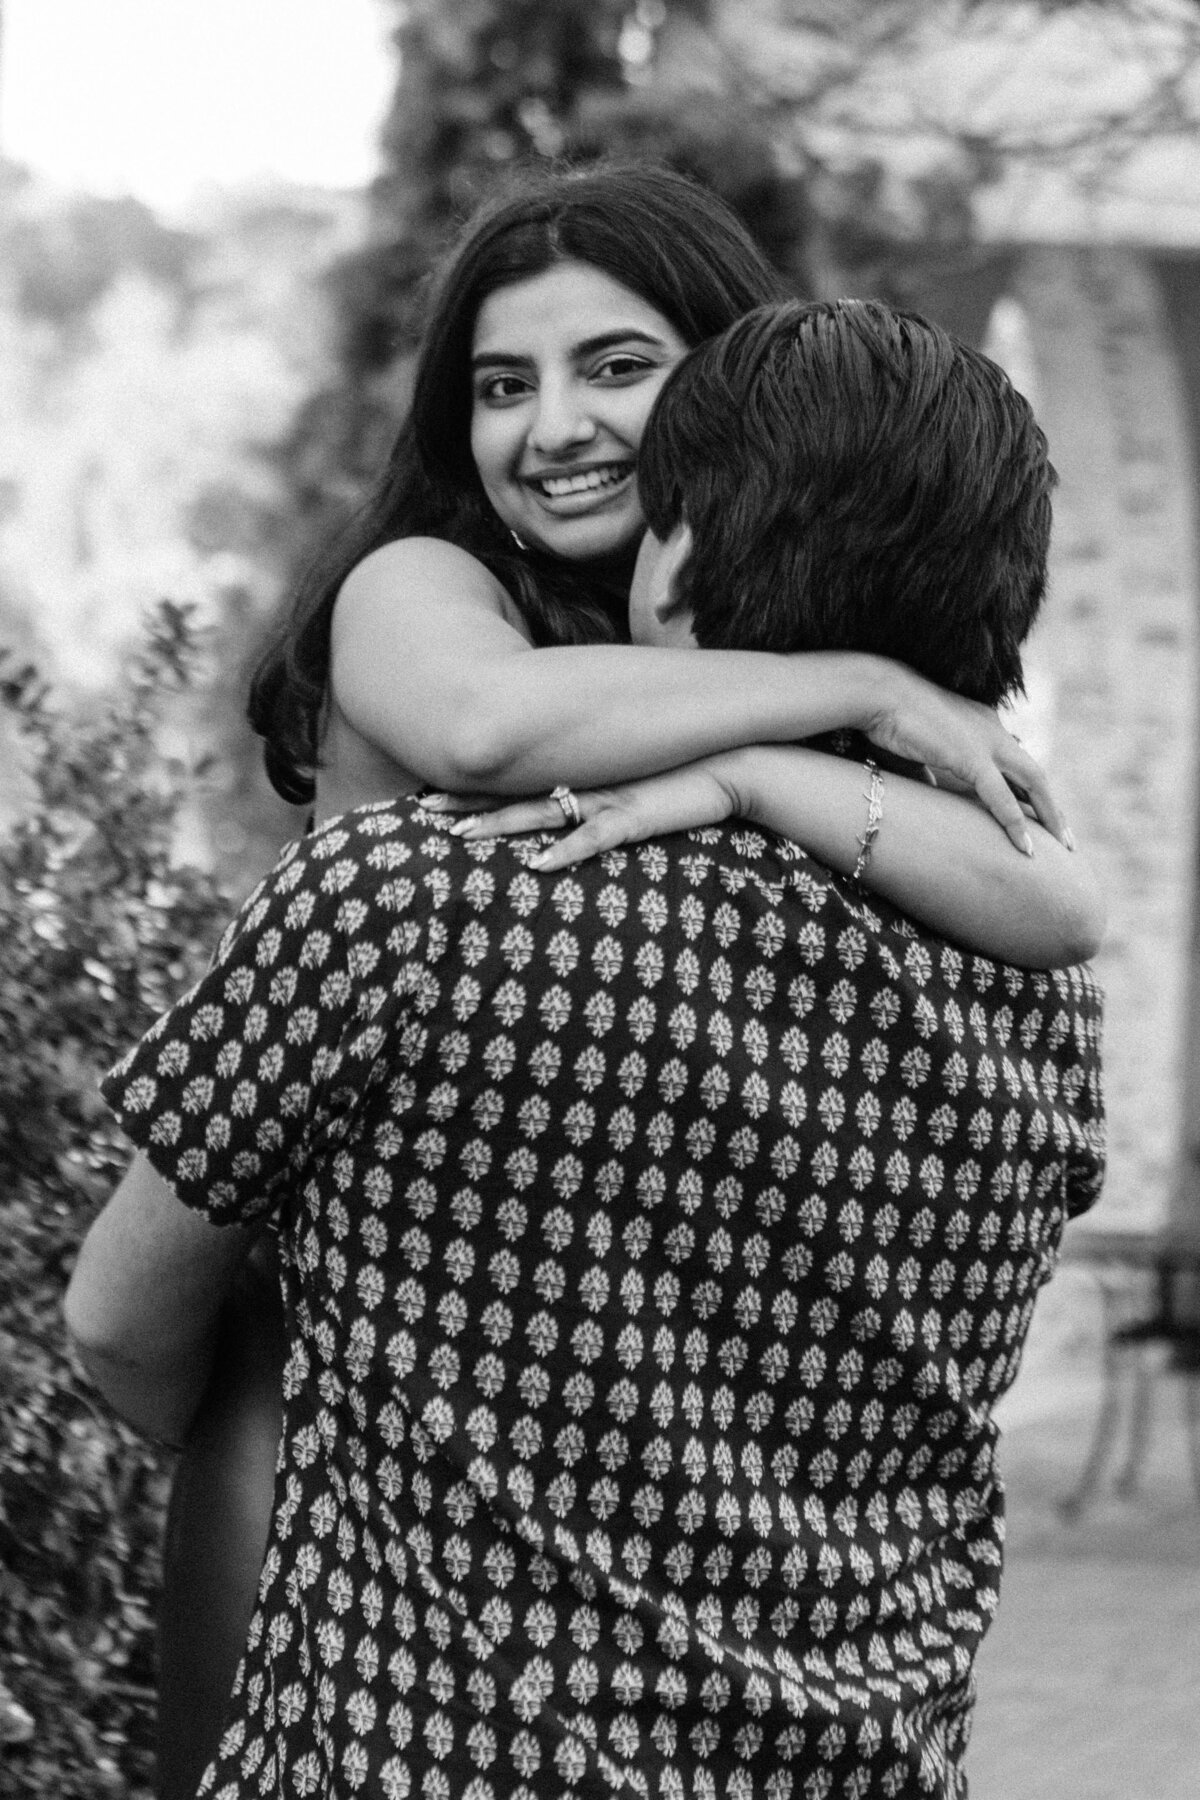 Black and White Couples Photographer SoCal